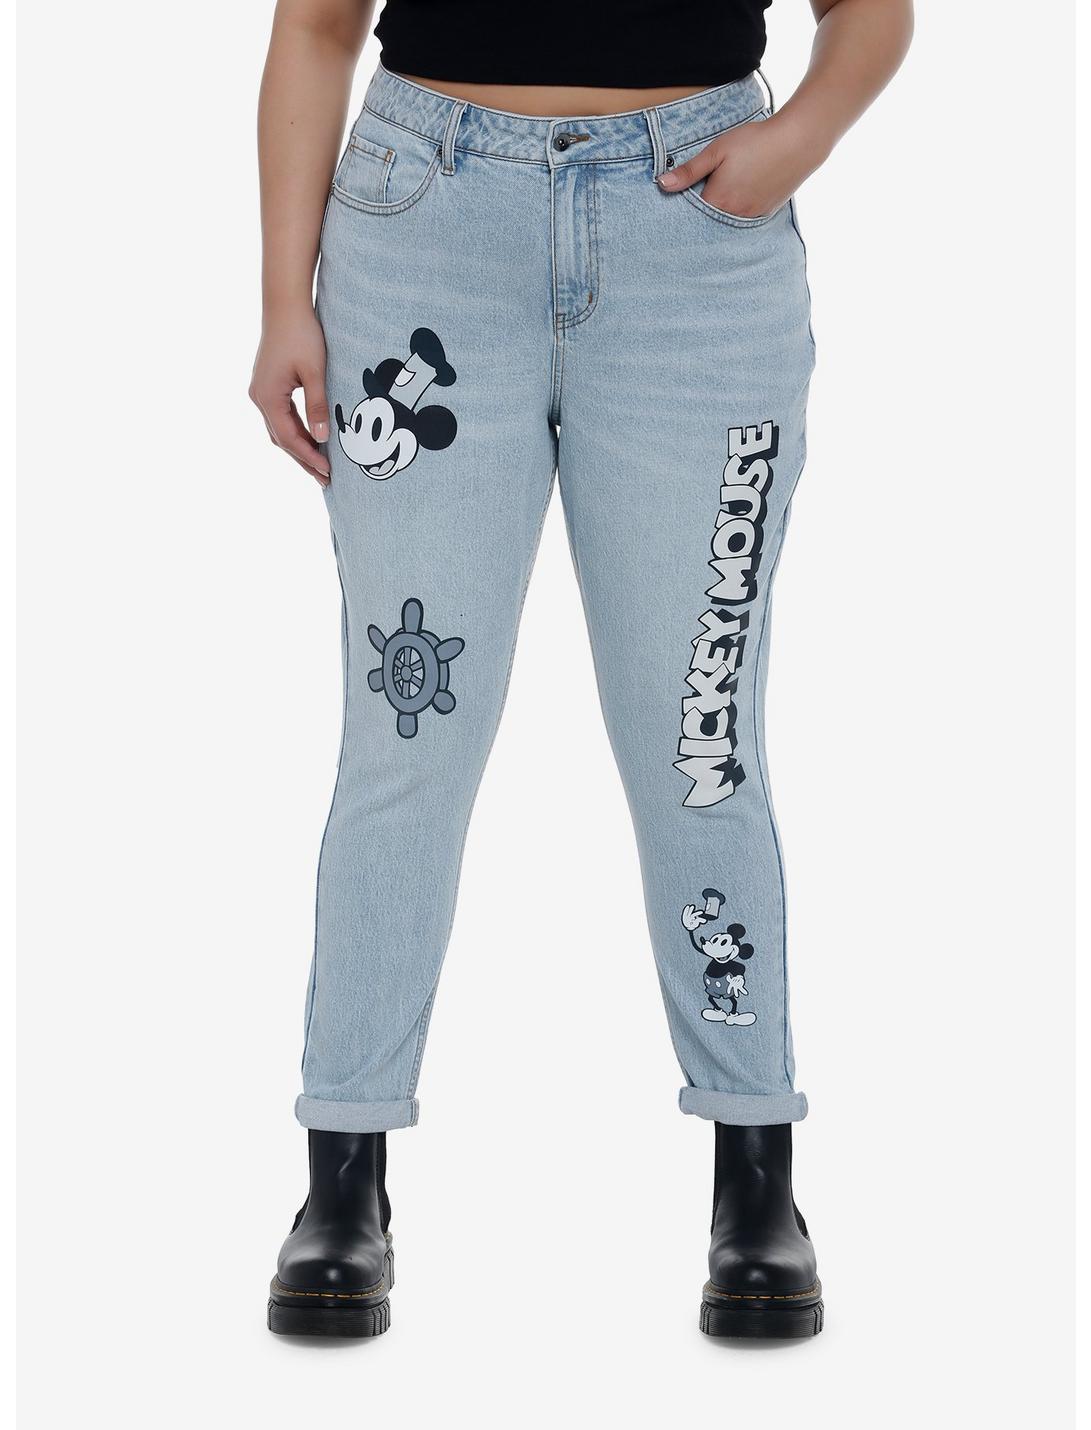 Disney Mickey Mouse Steamboat Willie Mom Jeans Plus Size, LIGHT WASH, hi-res